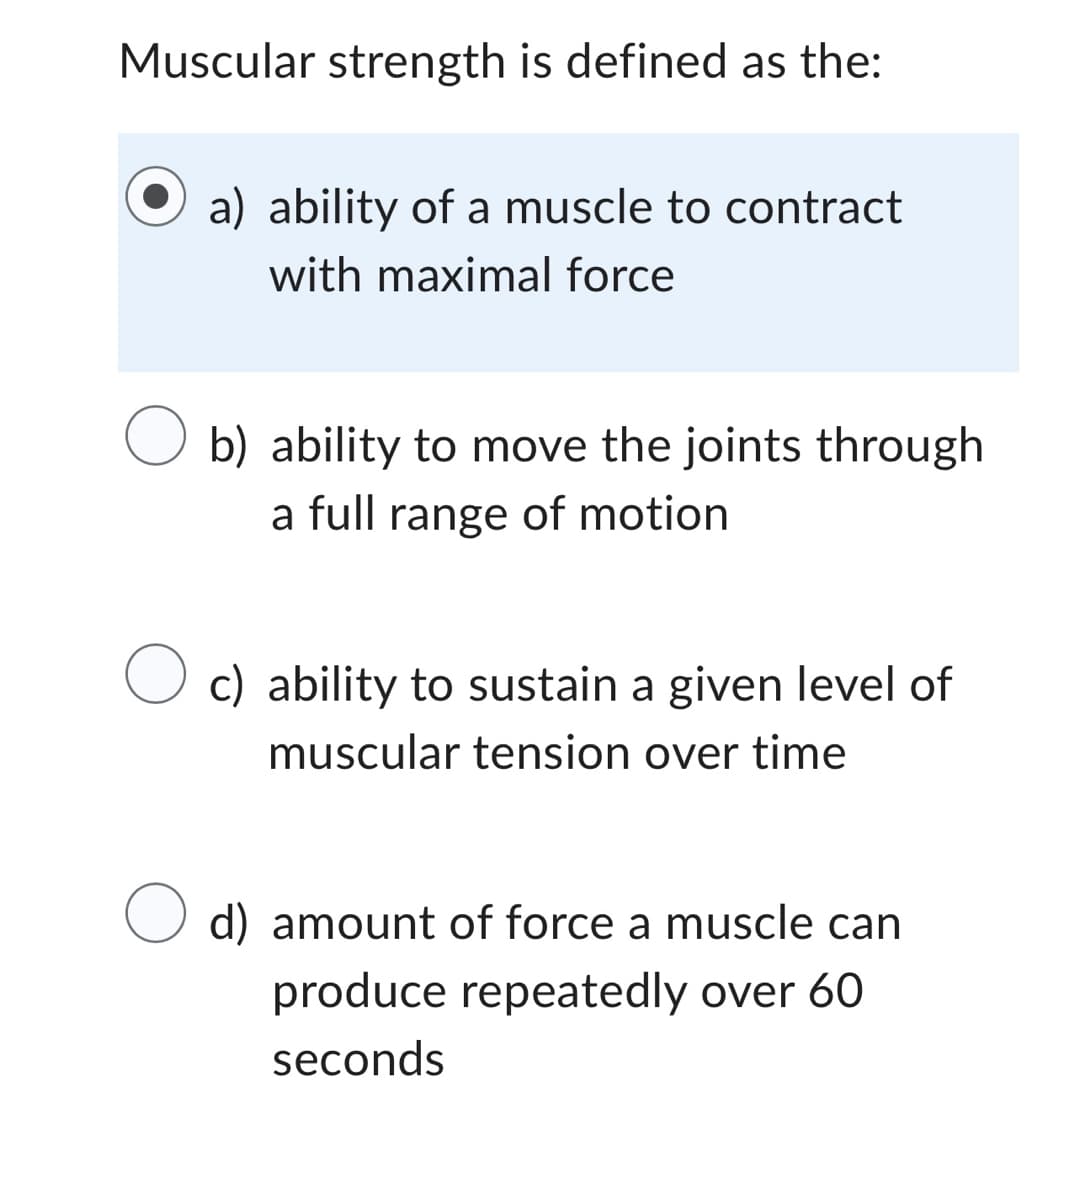 Muscular strength is defined as the:
a) ability of a muscle to contract
with maximal force
O b) ability to move the joints through
a full range of motion
O c) ability to sustain a given level of
muscular tension over time
d) amount of force a muscle can
produce repeatedly over 60
seconds